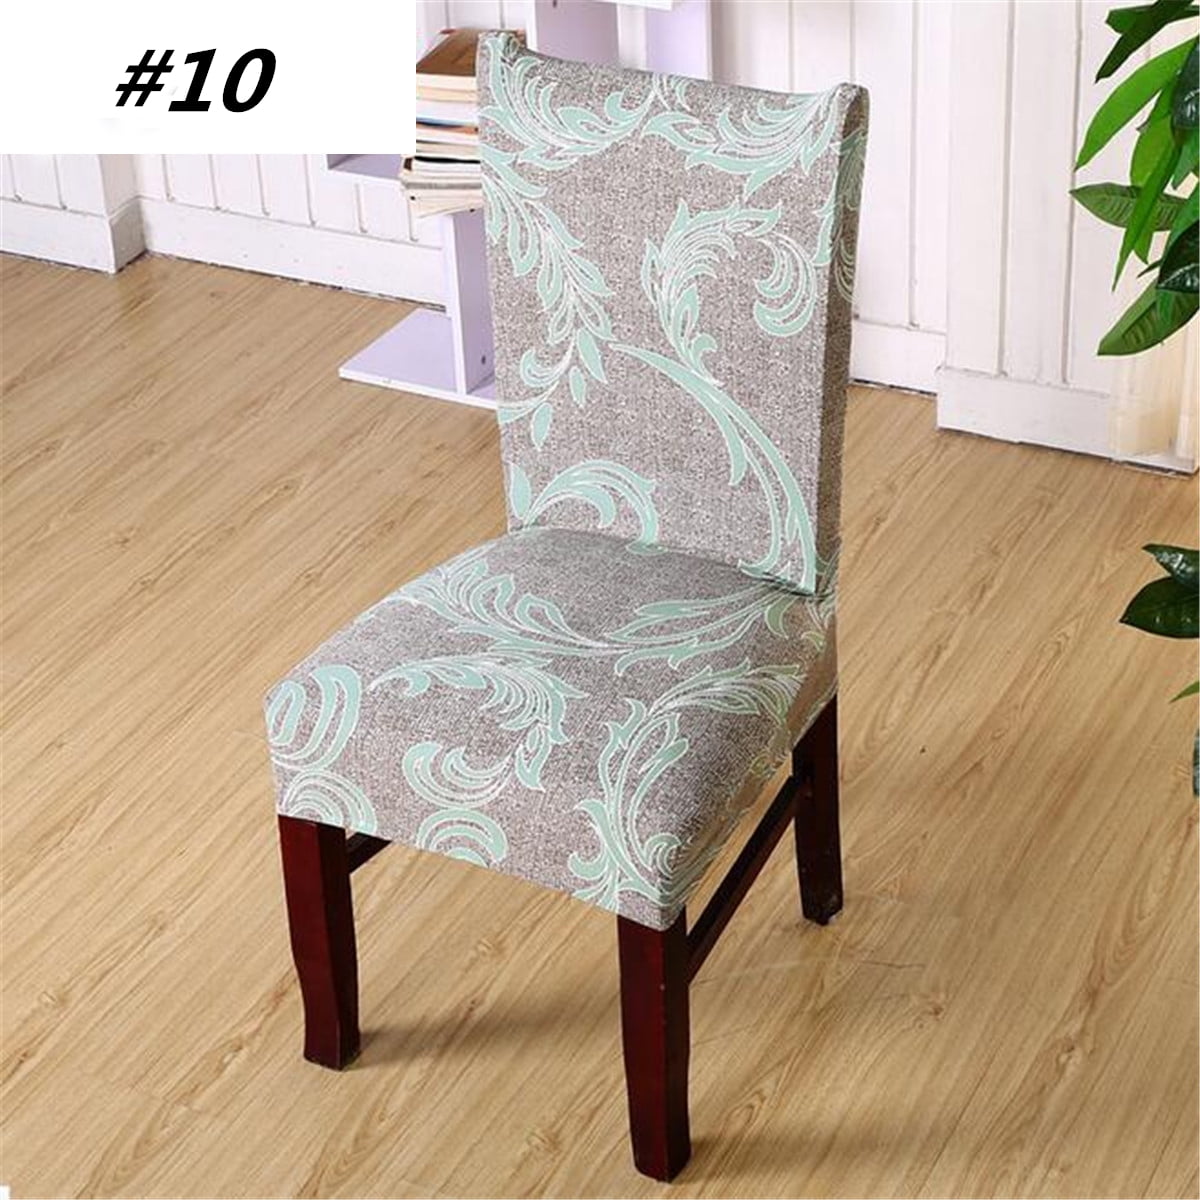 Banquet Chair Seat Protector Slipcover for Home Party Hotel Wedding Ceremony SoulFeel 6 x Soft Spandex Fit Stretch Short Dining Room Chair Covers with Printed Pattern Style 26 